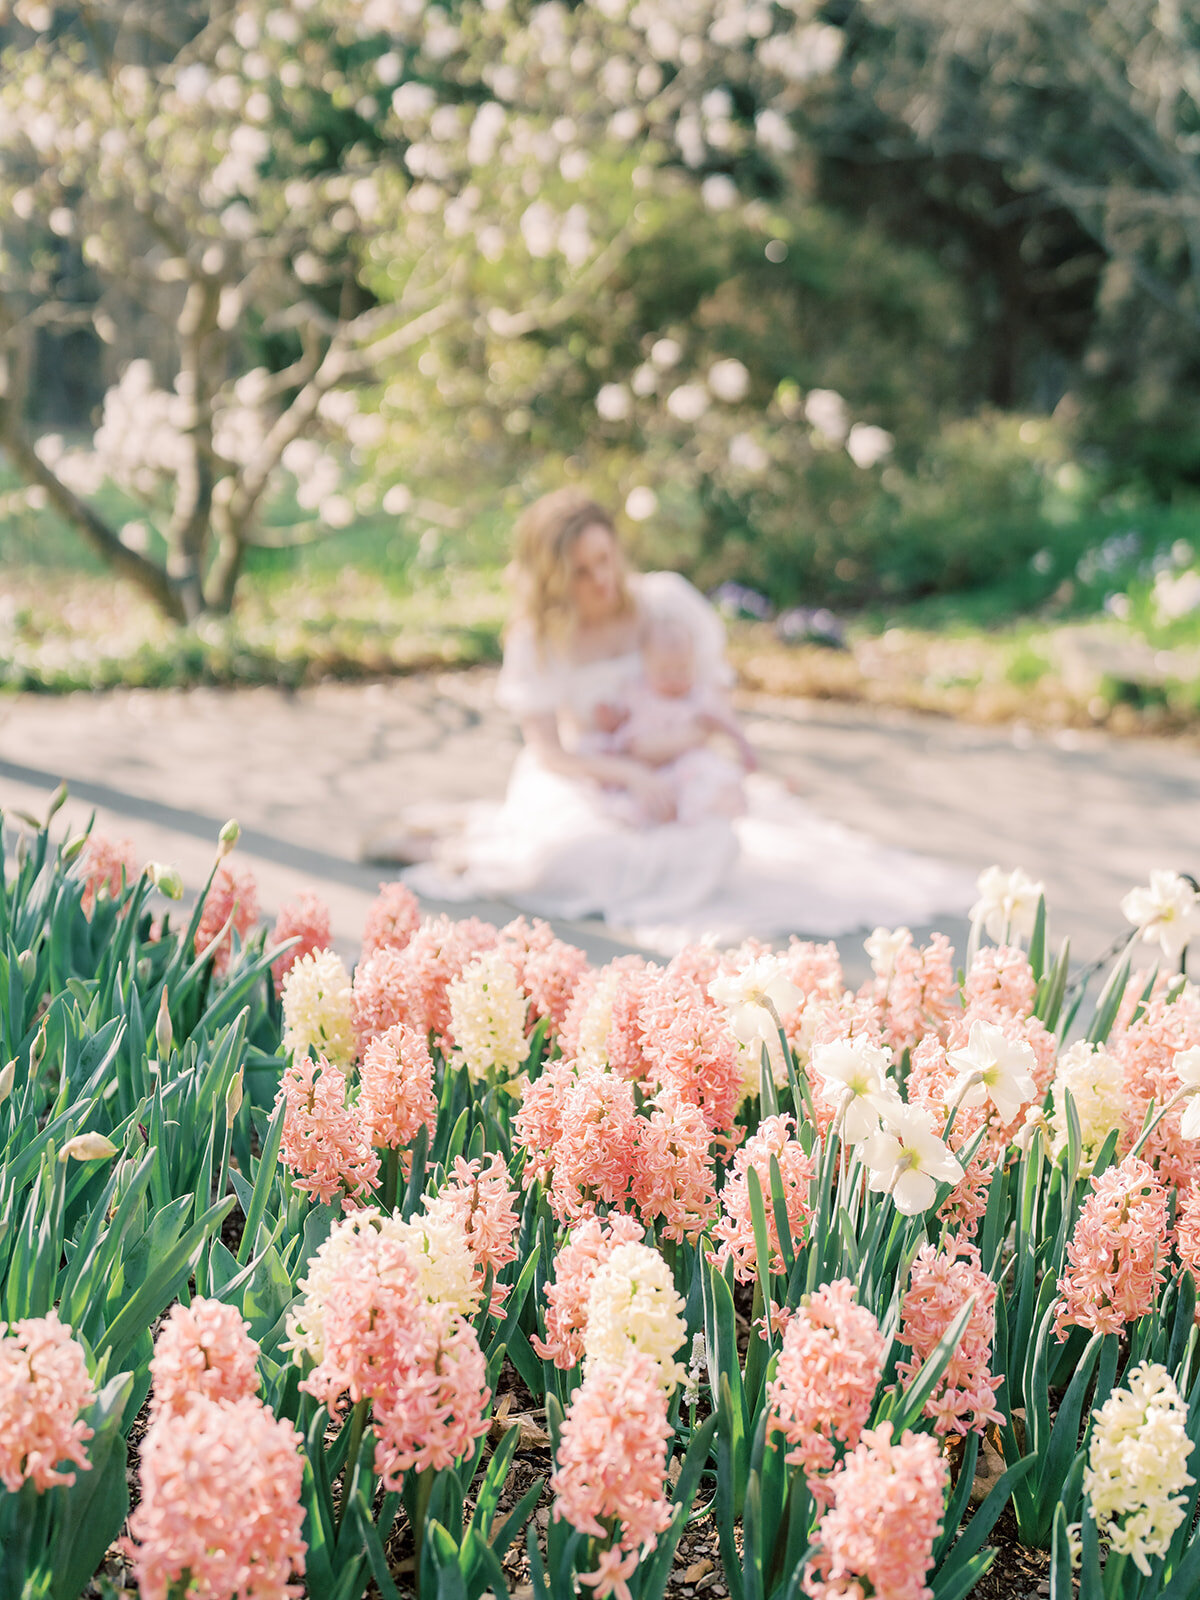 A mother sits with her baby girl in the background with pink hyacinths in the foreground.